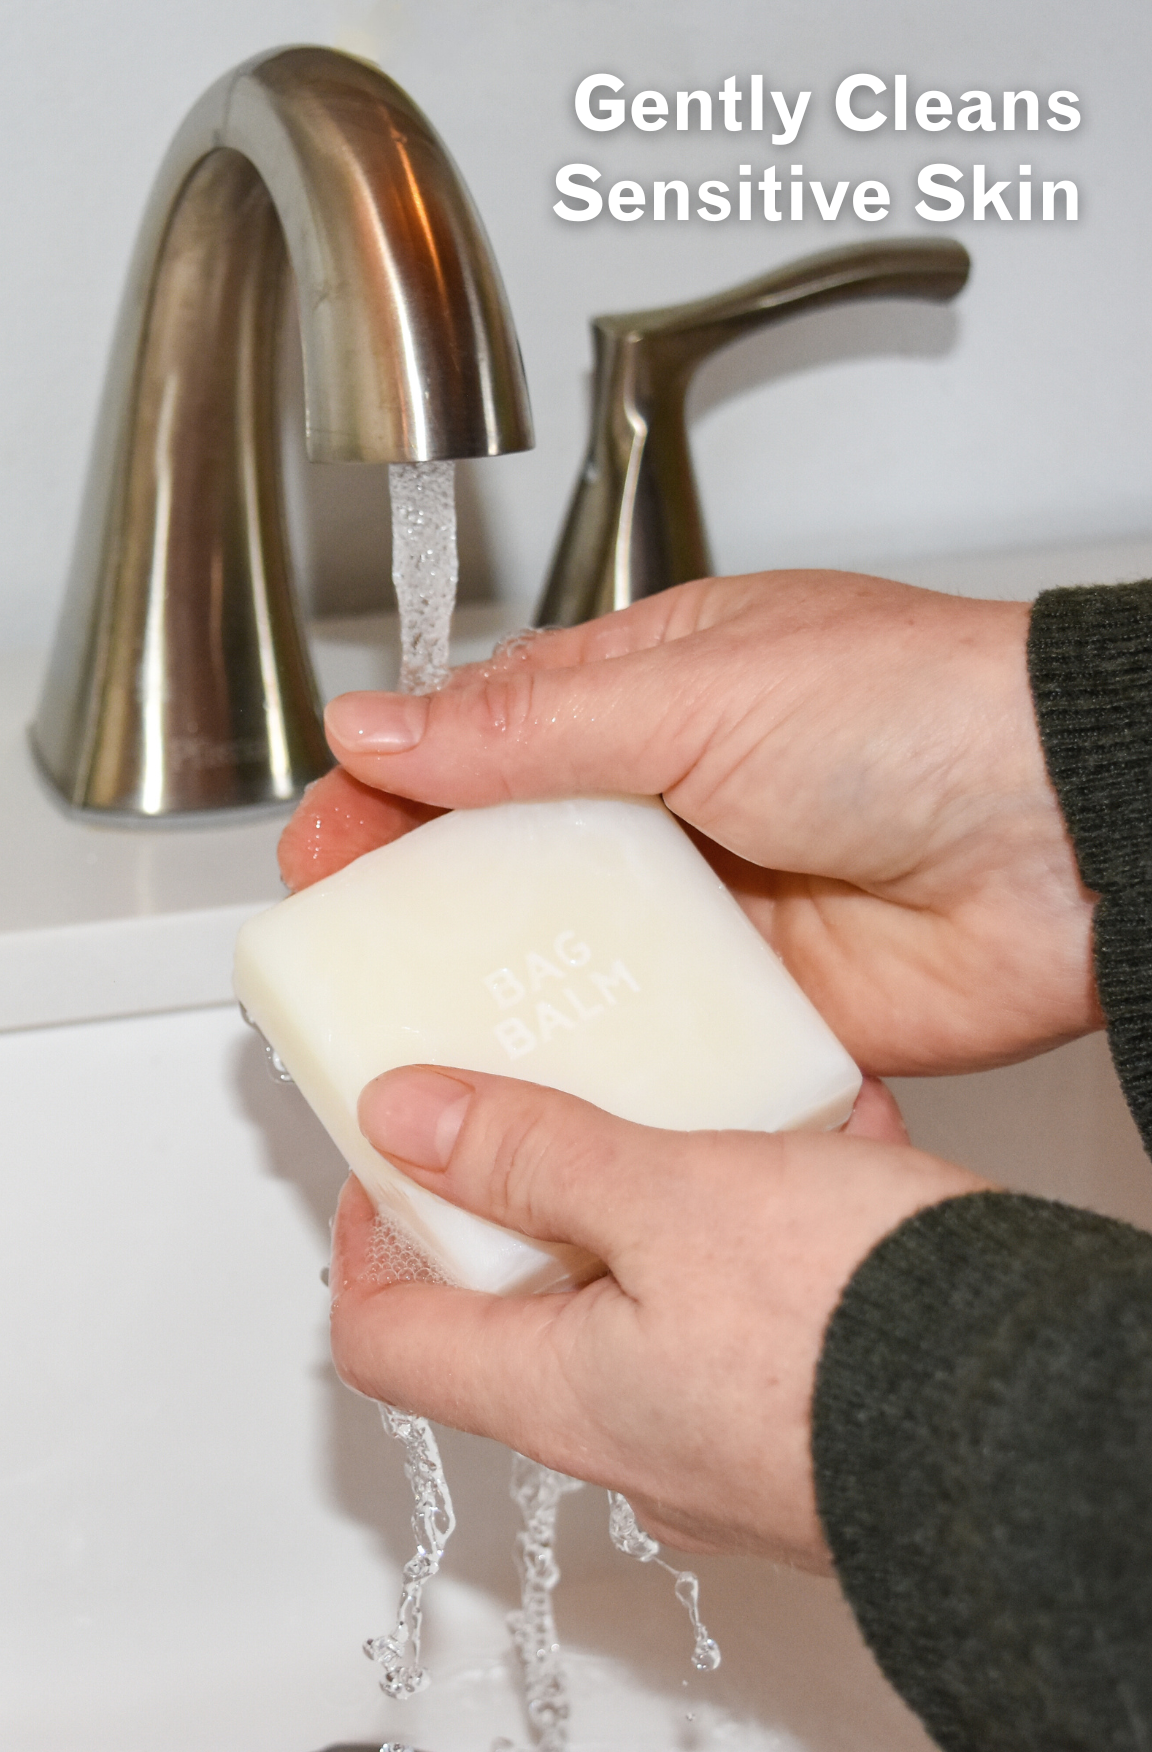 Hands under faucet holding bar of soap